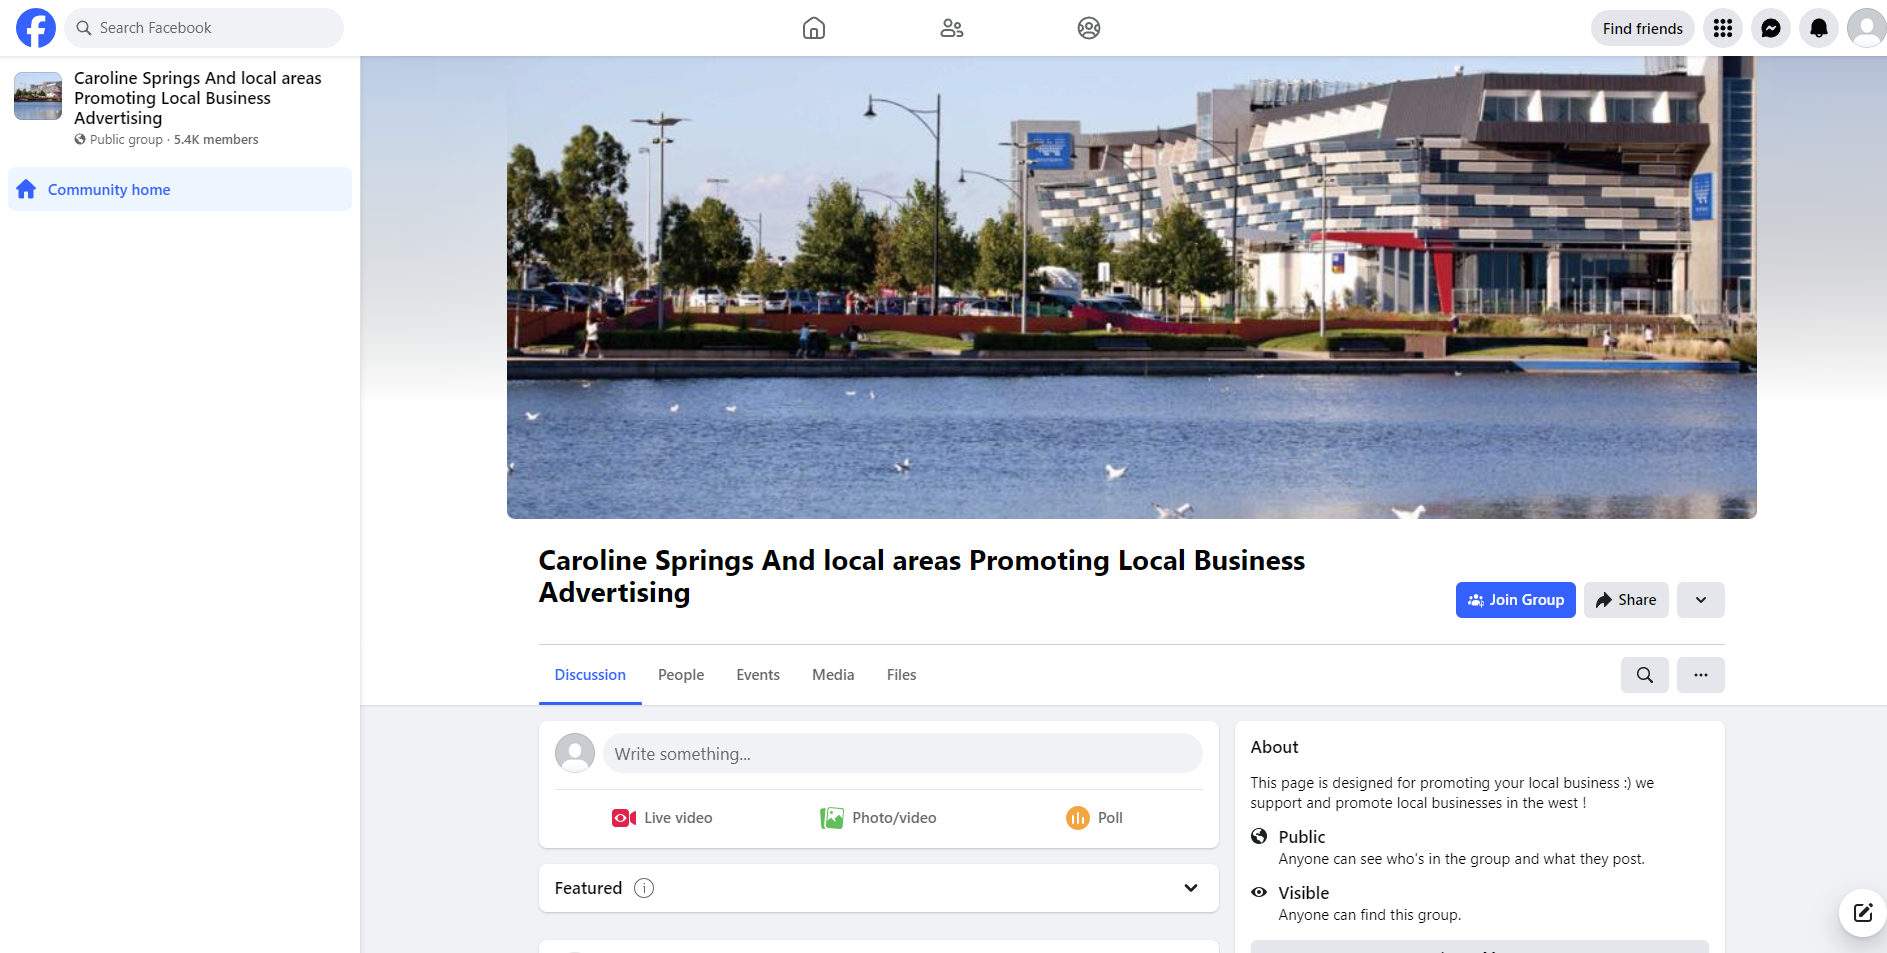 Caroline Springs and Local Areas Promoting Business Advertising